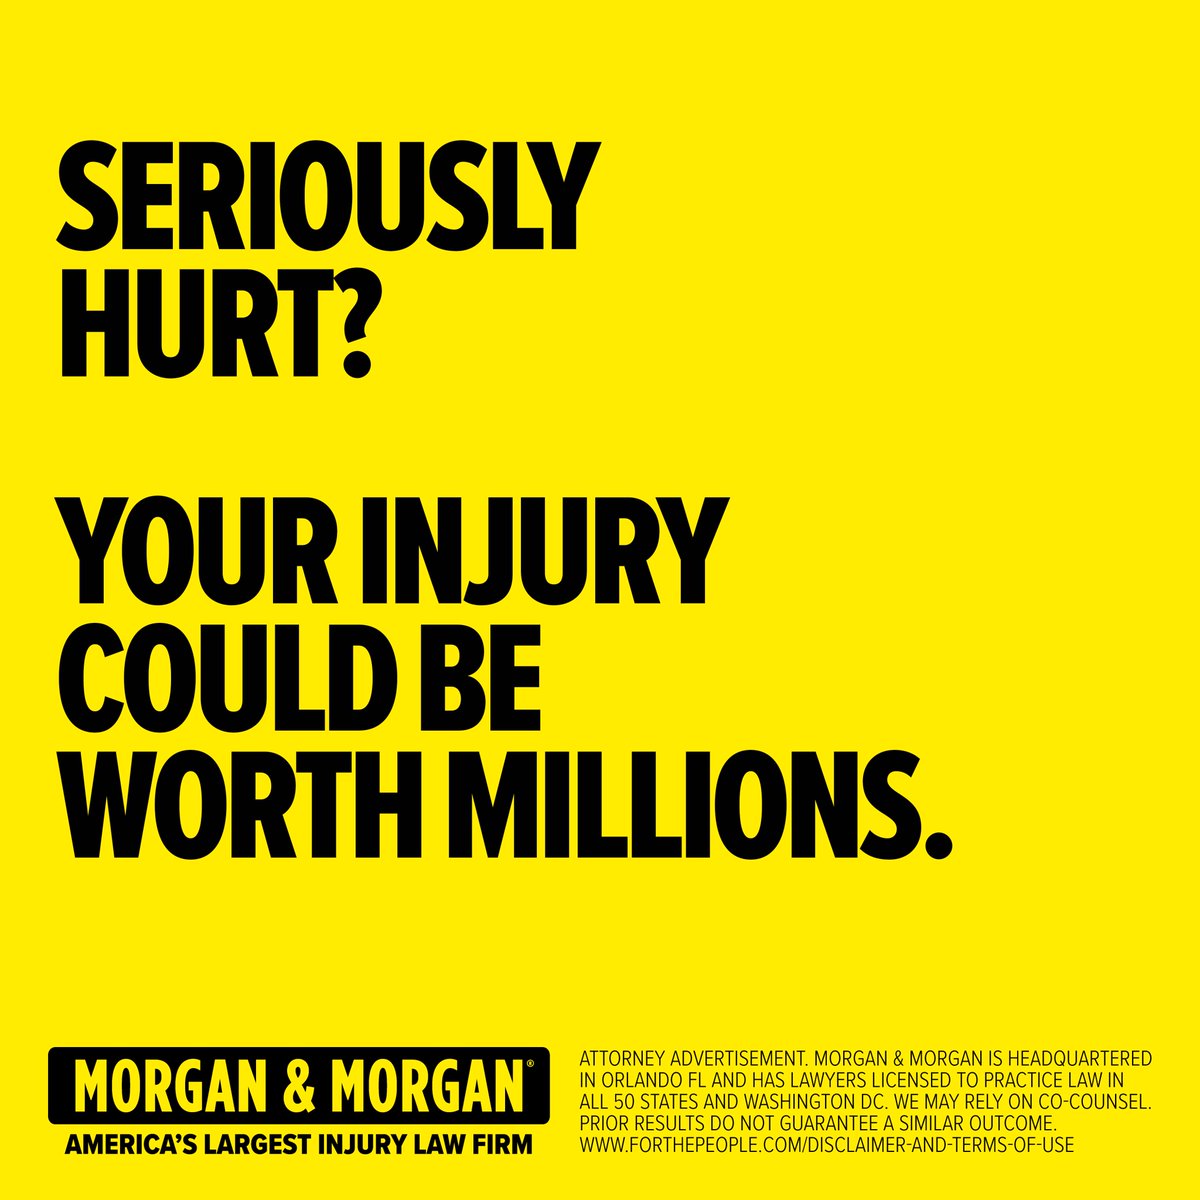 Morgan & Morgan recently won a car crash client $25 million. When you're seriously hurt, your injury could be worth millions. You can start your claim now in just a click #ad ForThePeople.com/HorsingAroundLA